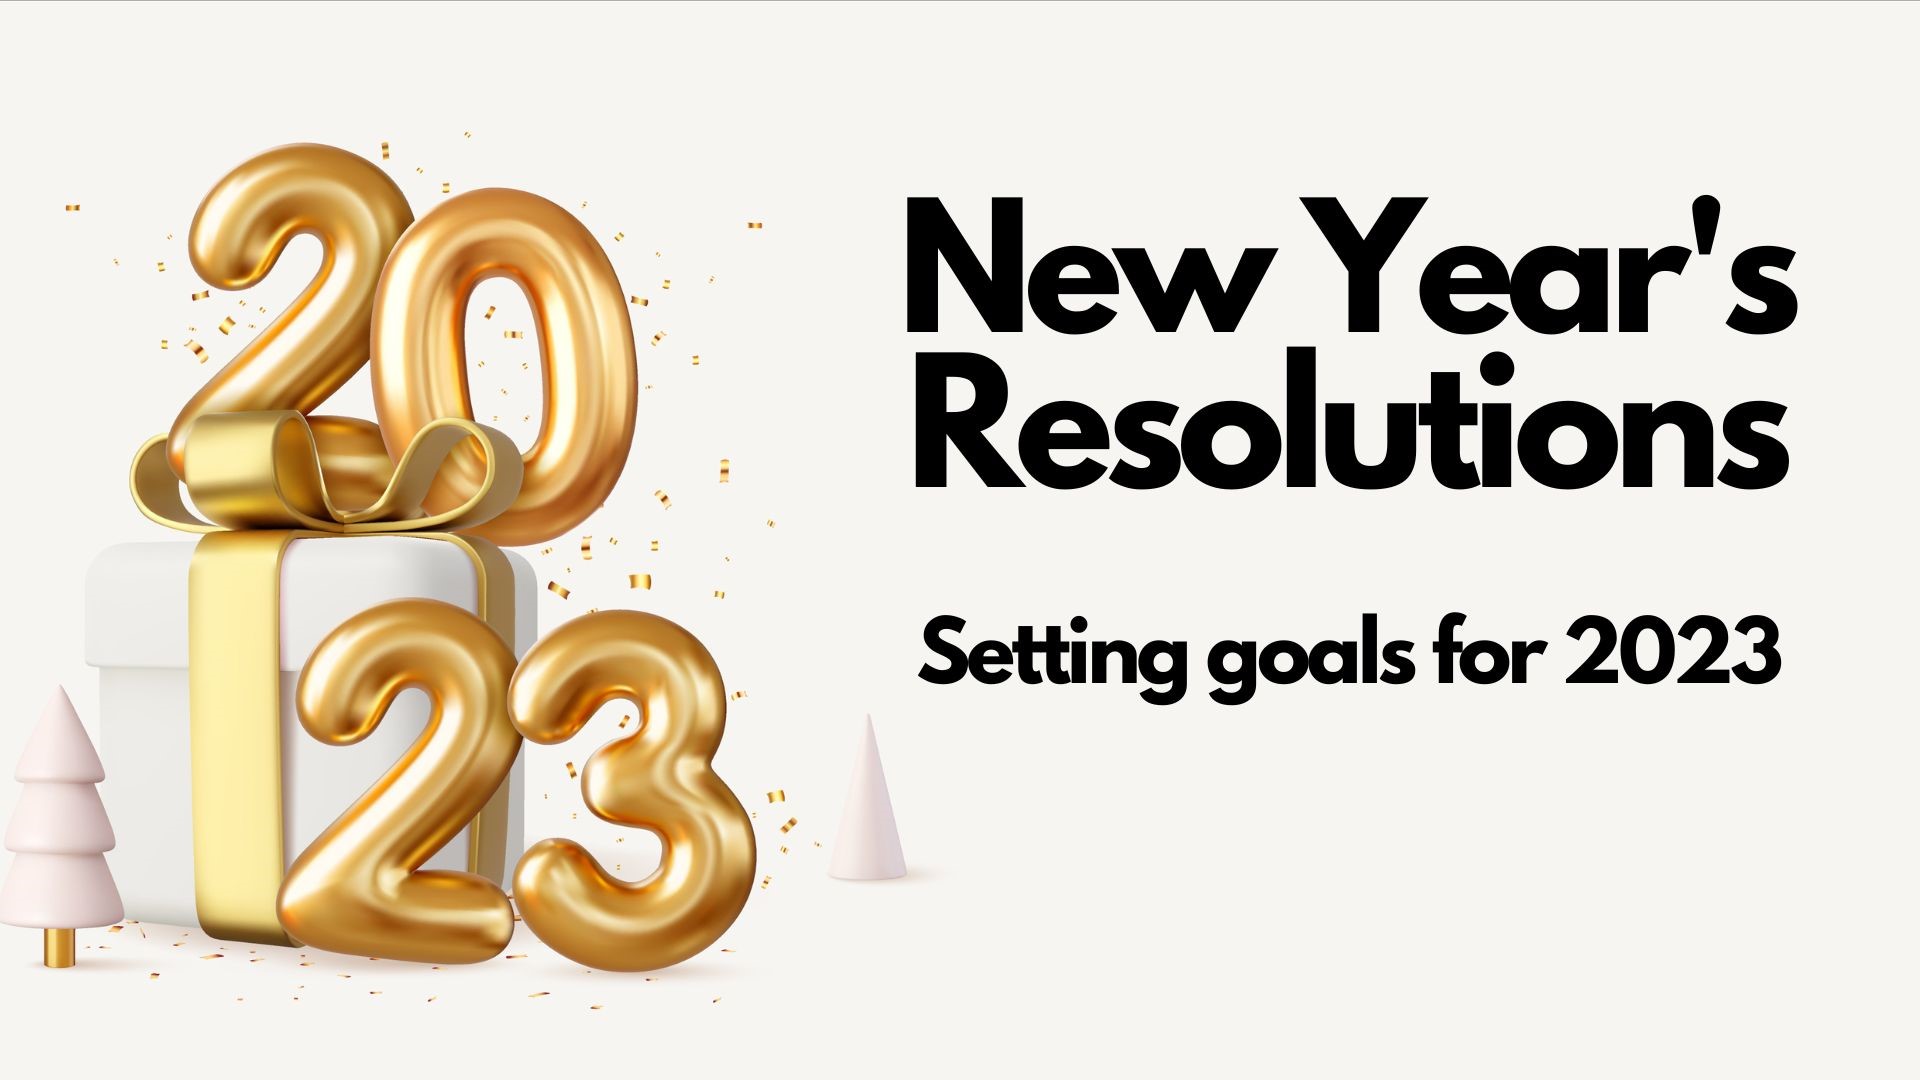 Tips from experts on how to stick to your New Year's resolutions and ideas on how to tackle your goals in 2023.